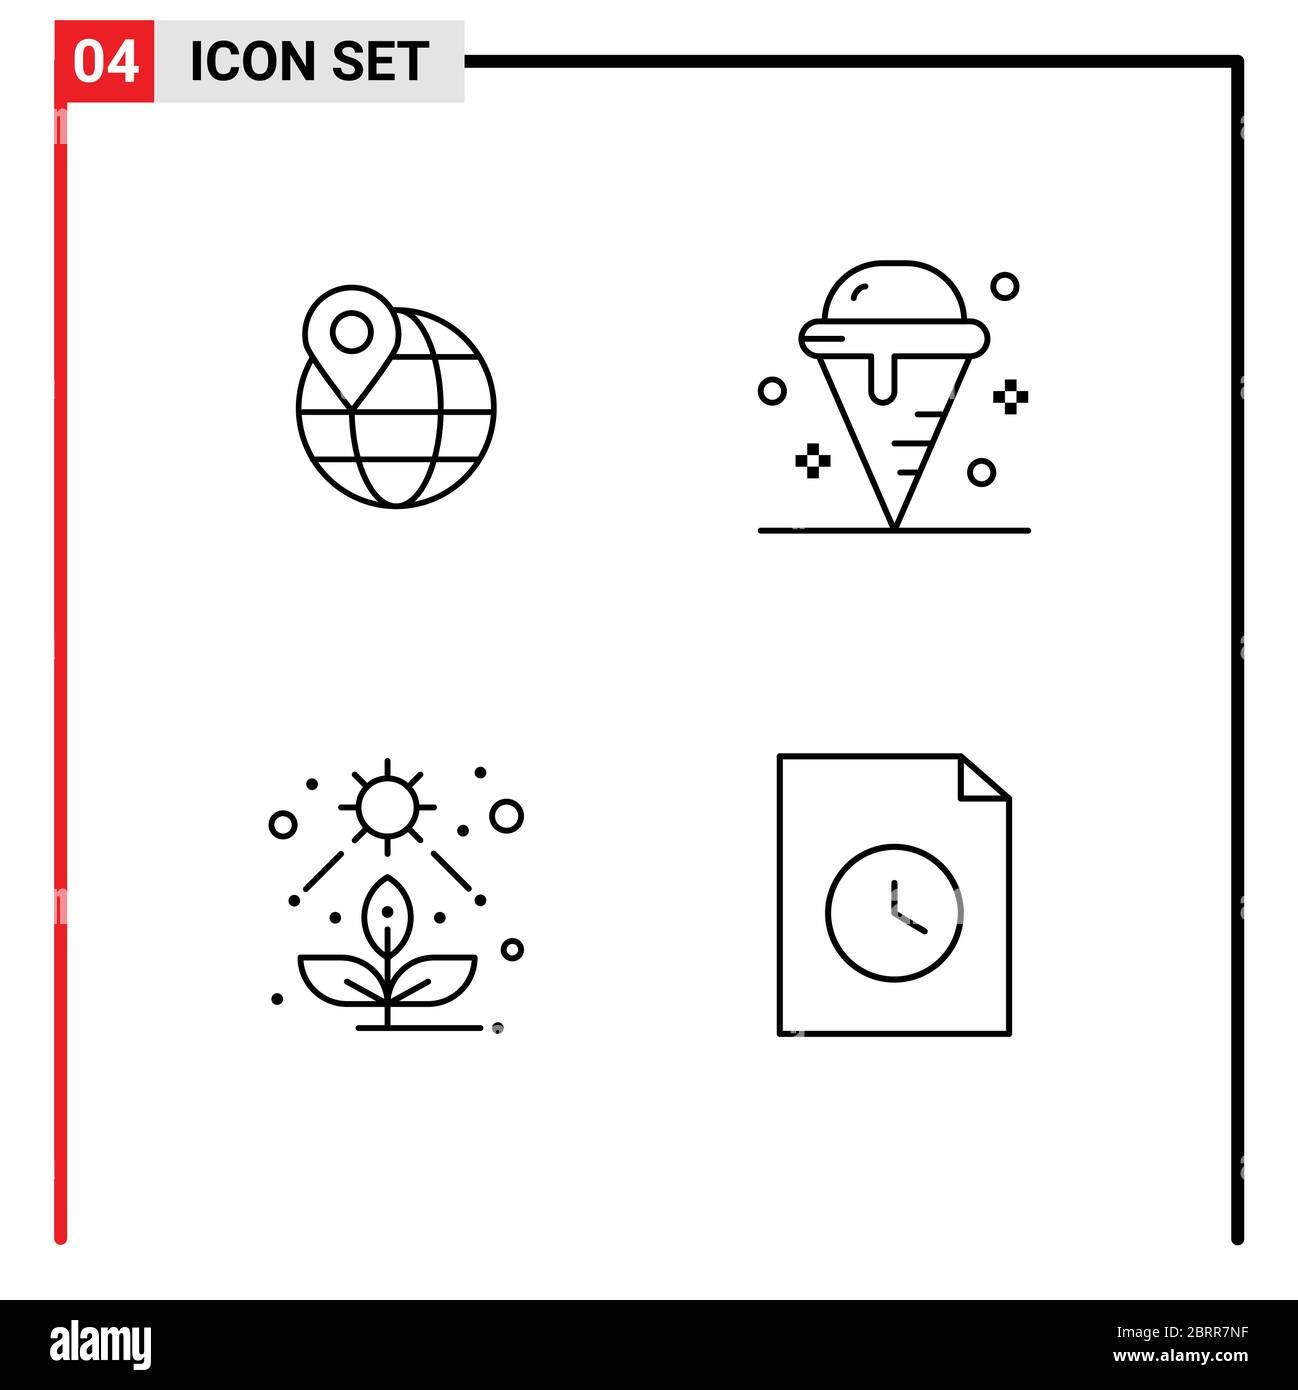 Mobile Interface Line Set of 4 Pictograms of location, direct, internet, ice, plant Editable Vector Design Elements Stock Vector